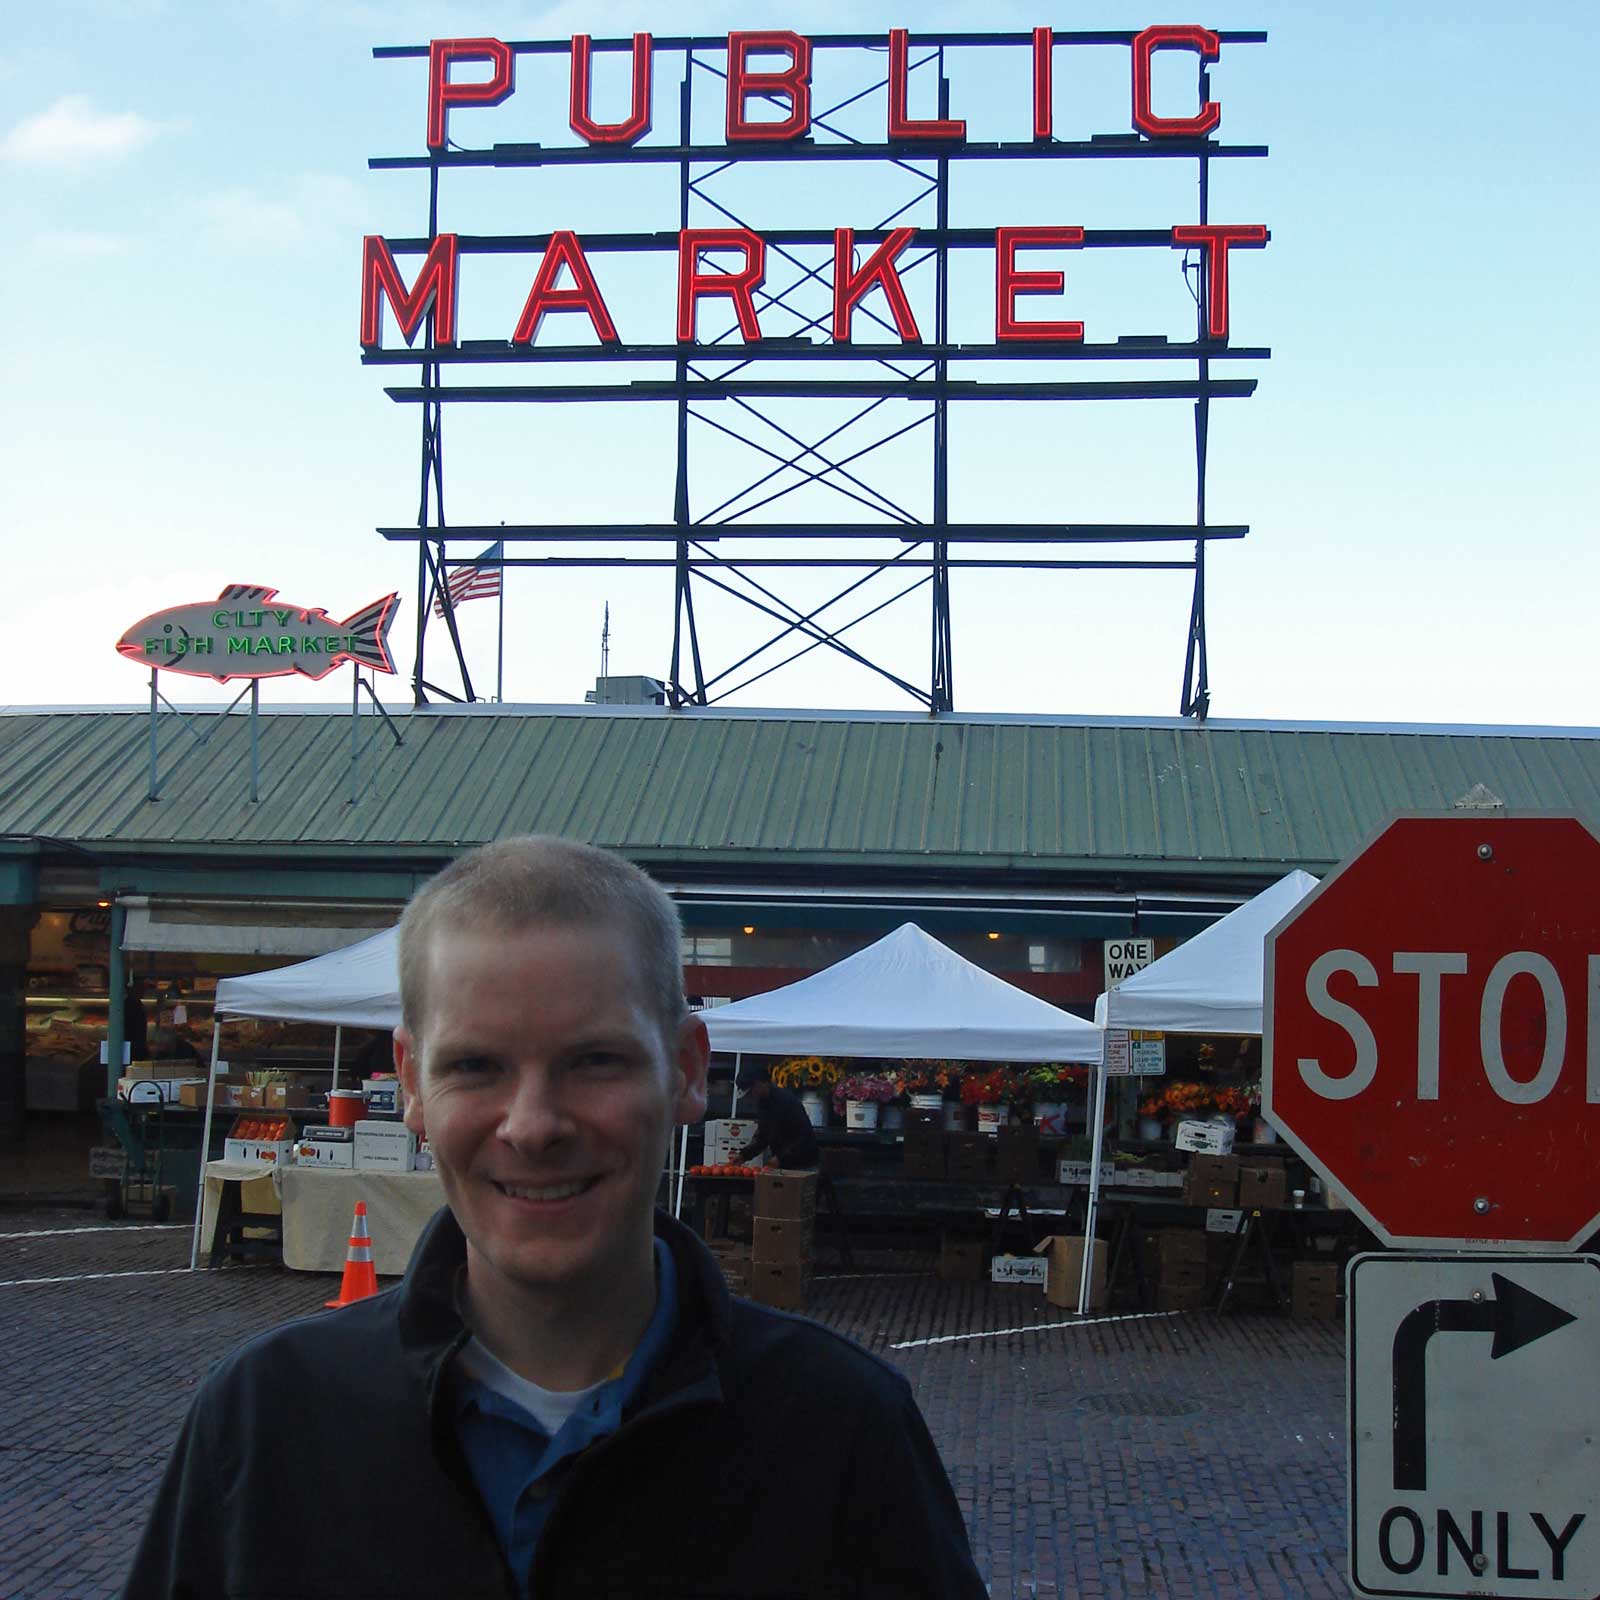 William stand on the street with a large sign in the background that reads
“Public Market”